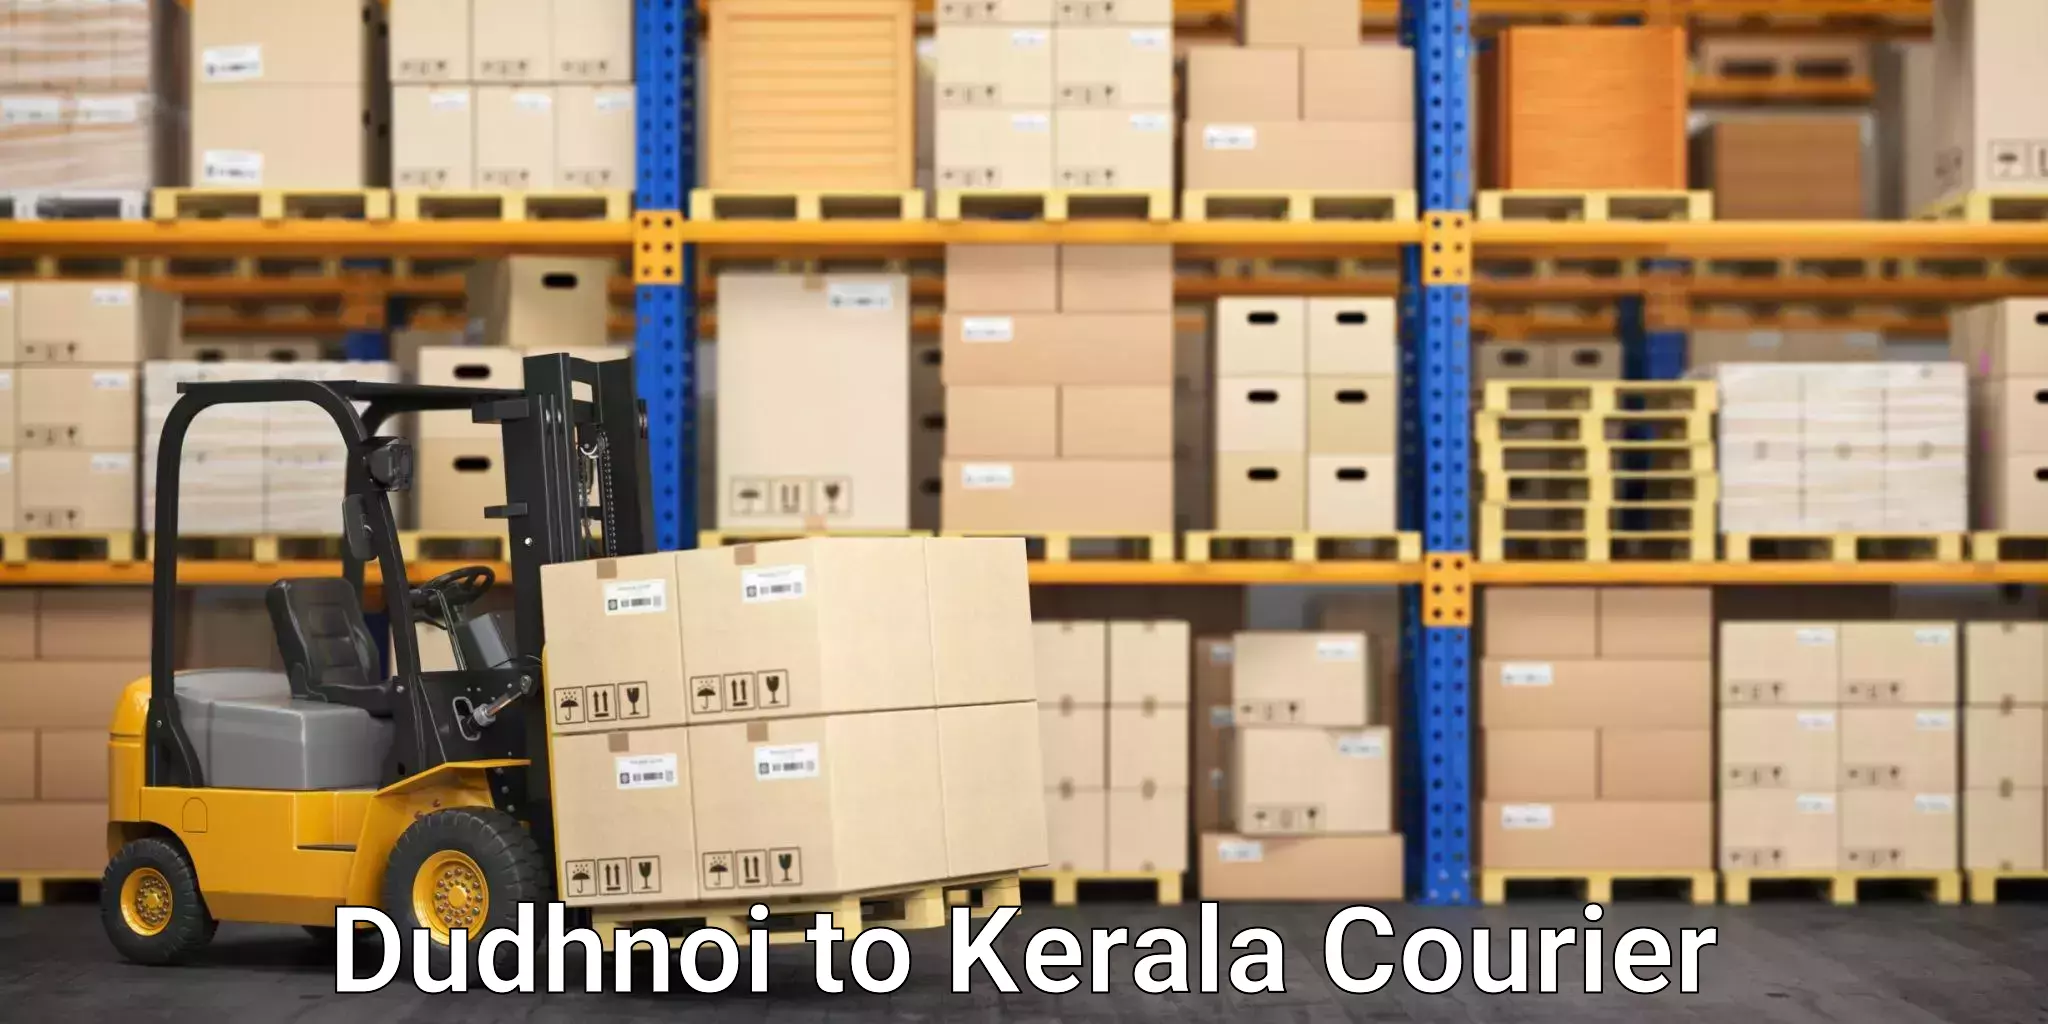 Parcel delivery automation Dudhnoi to Calicut University Malappuram